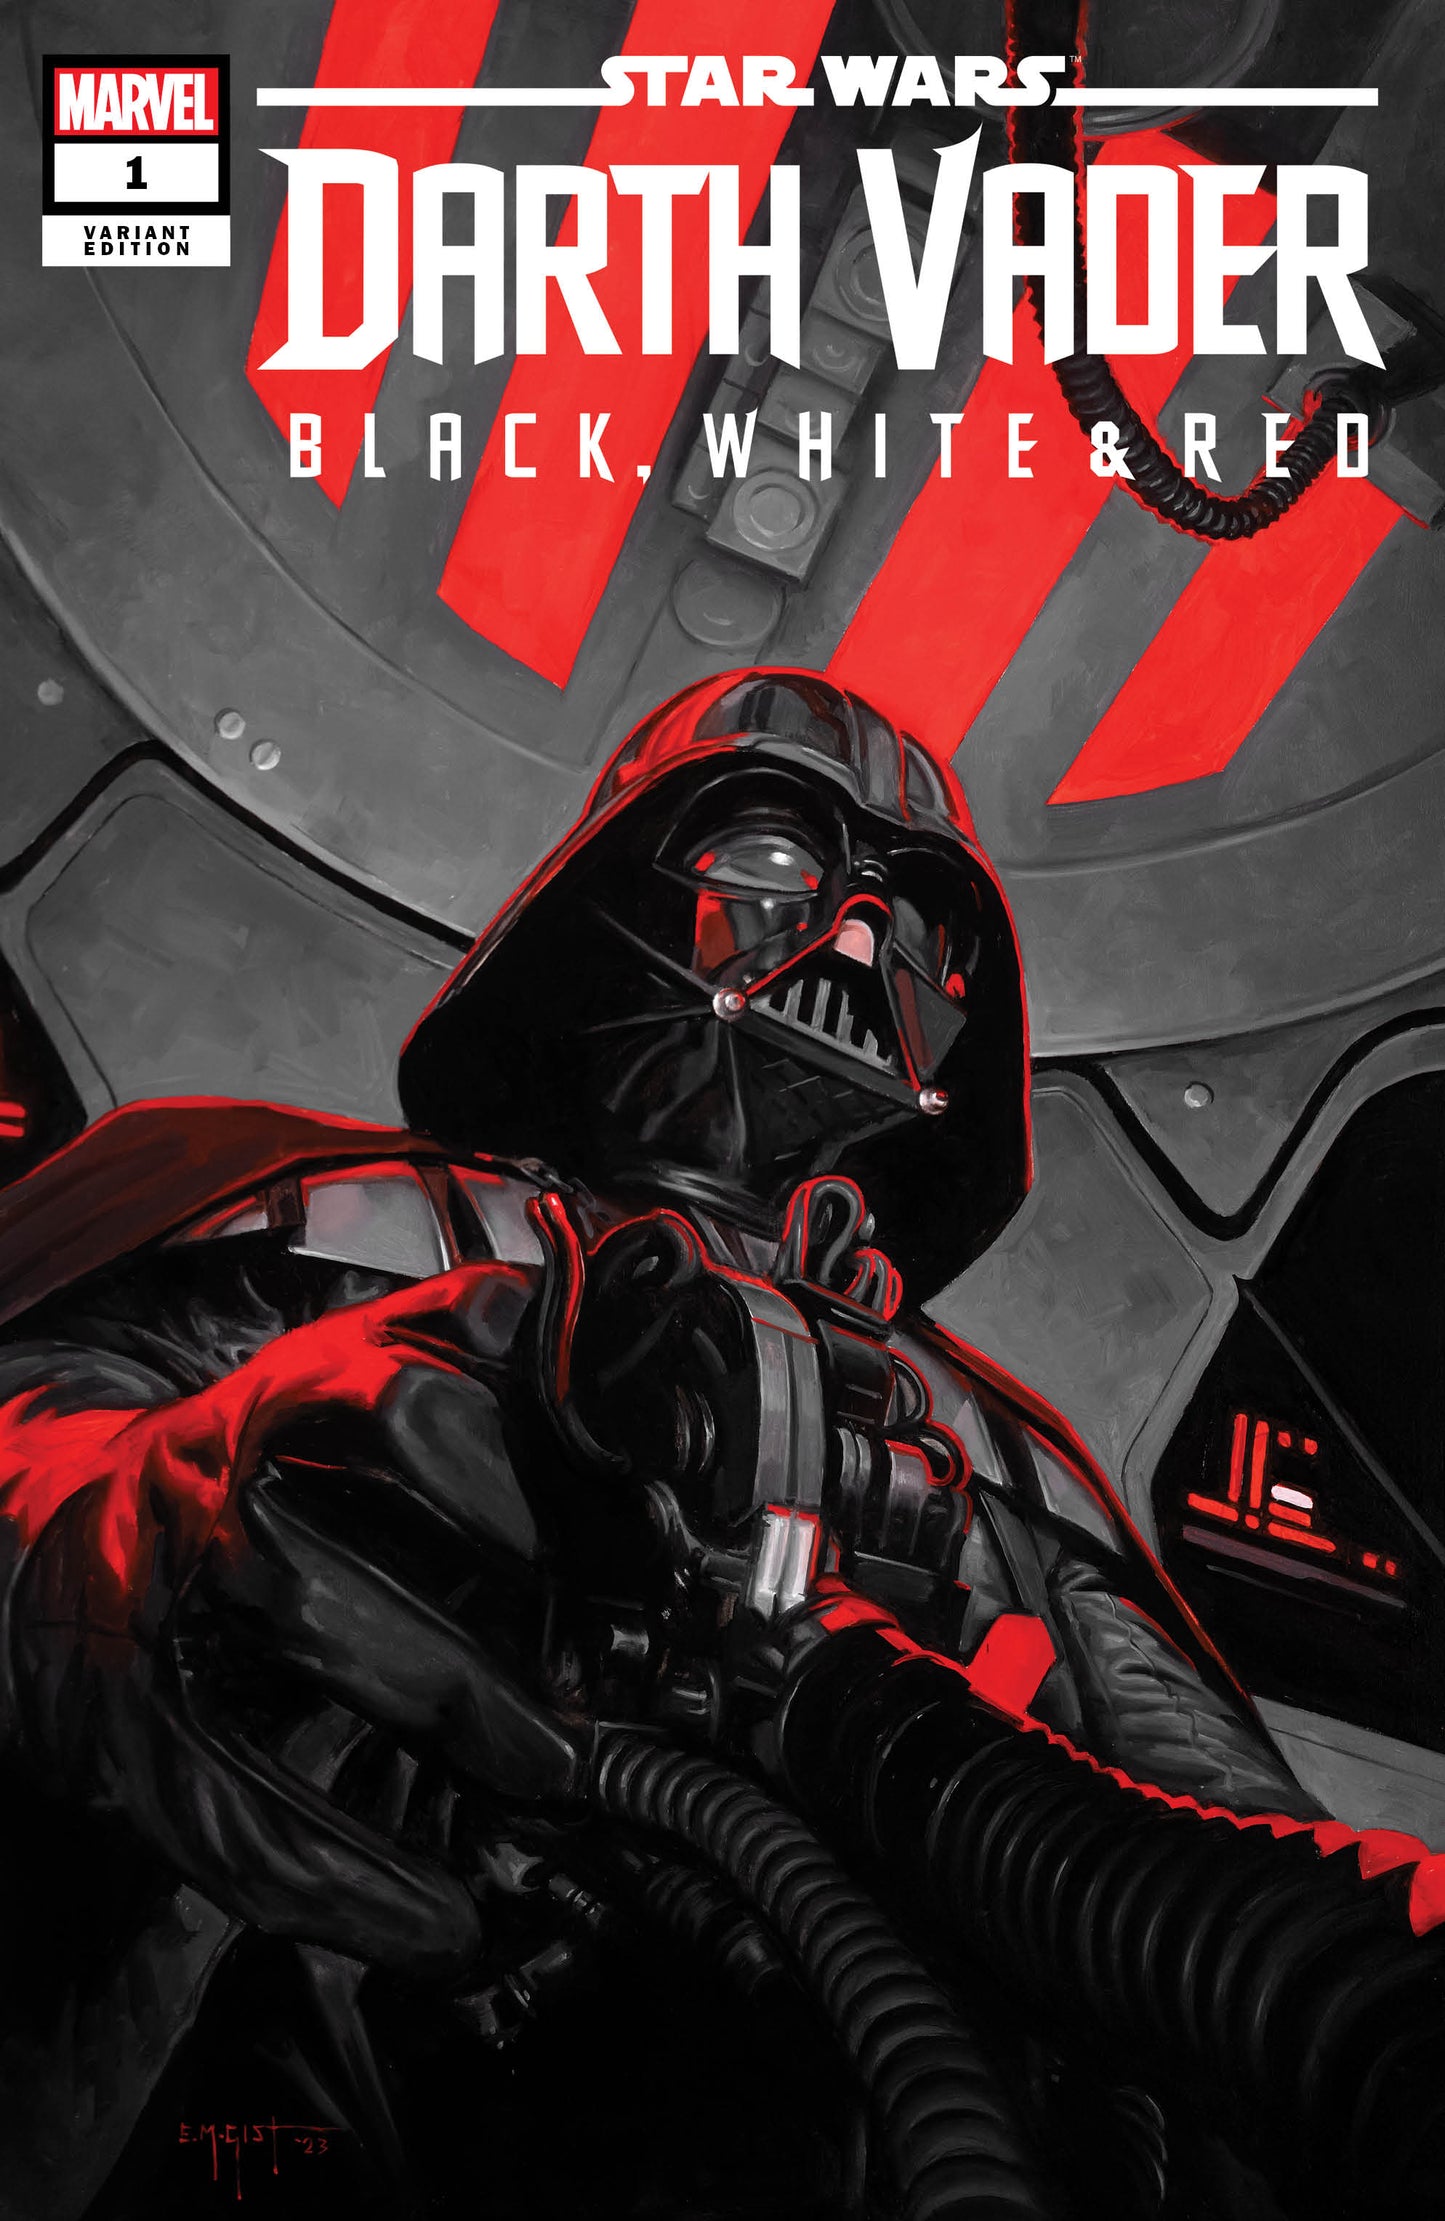 STAR WARS DARTH VADER BLACK WHITE AND RED #1 EM GIST VARIANT LIMITED TO 800 COPIES WITH NUMBERED COA